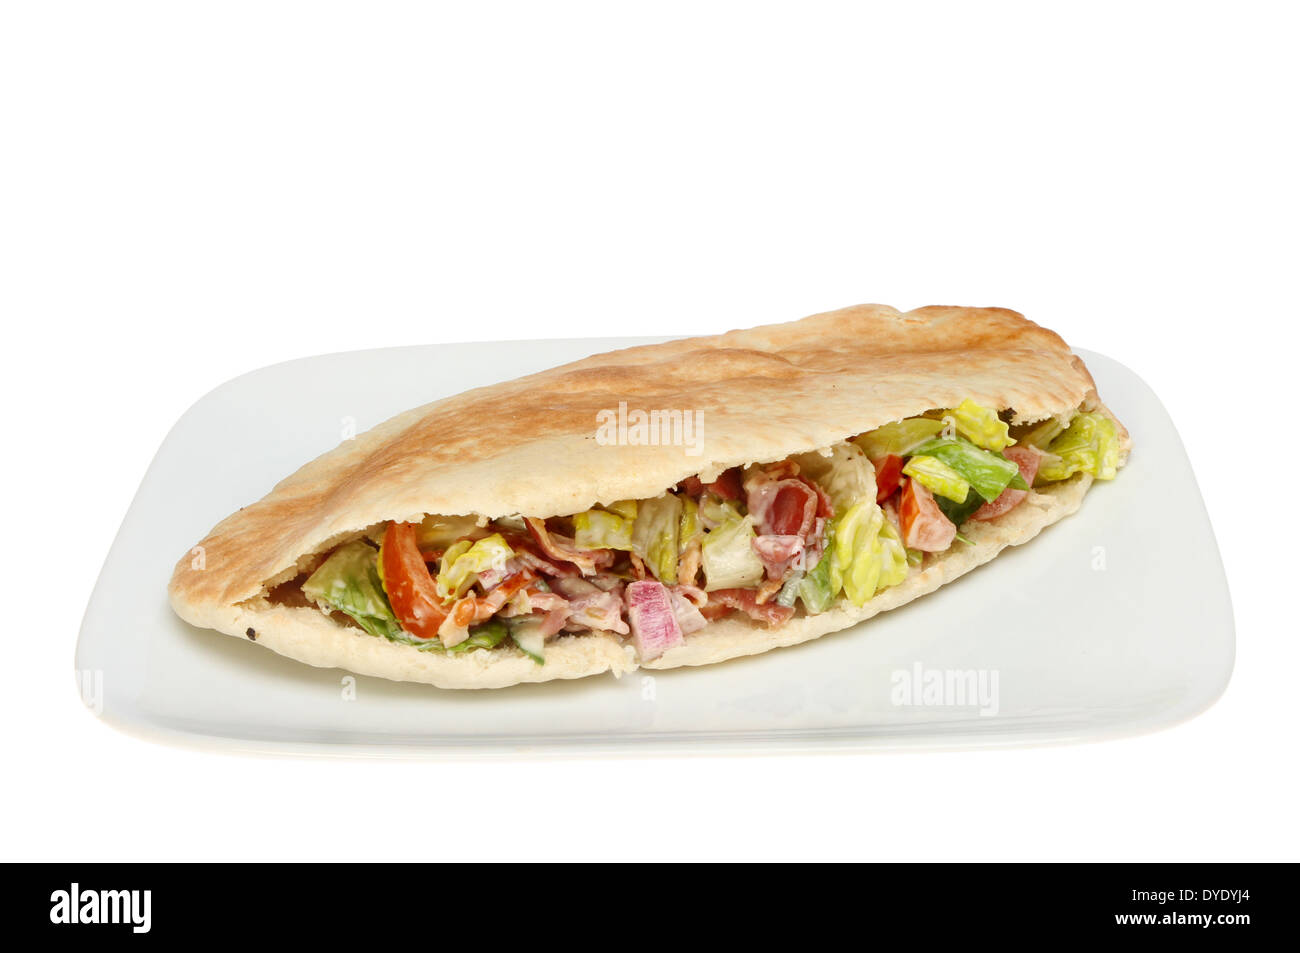 Pitta bread stuffed with crispy bacon and salad on a plate isolated against white Stock Photo